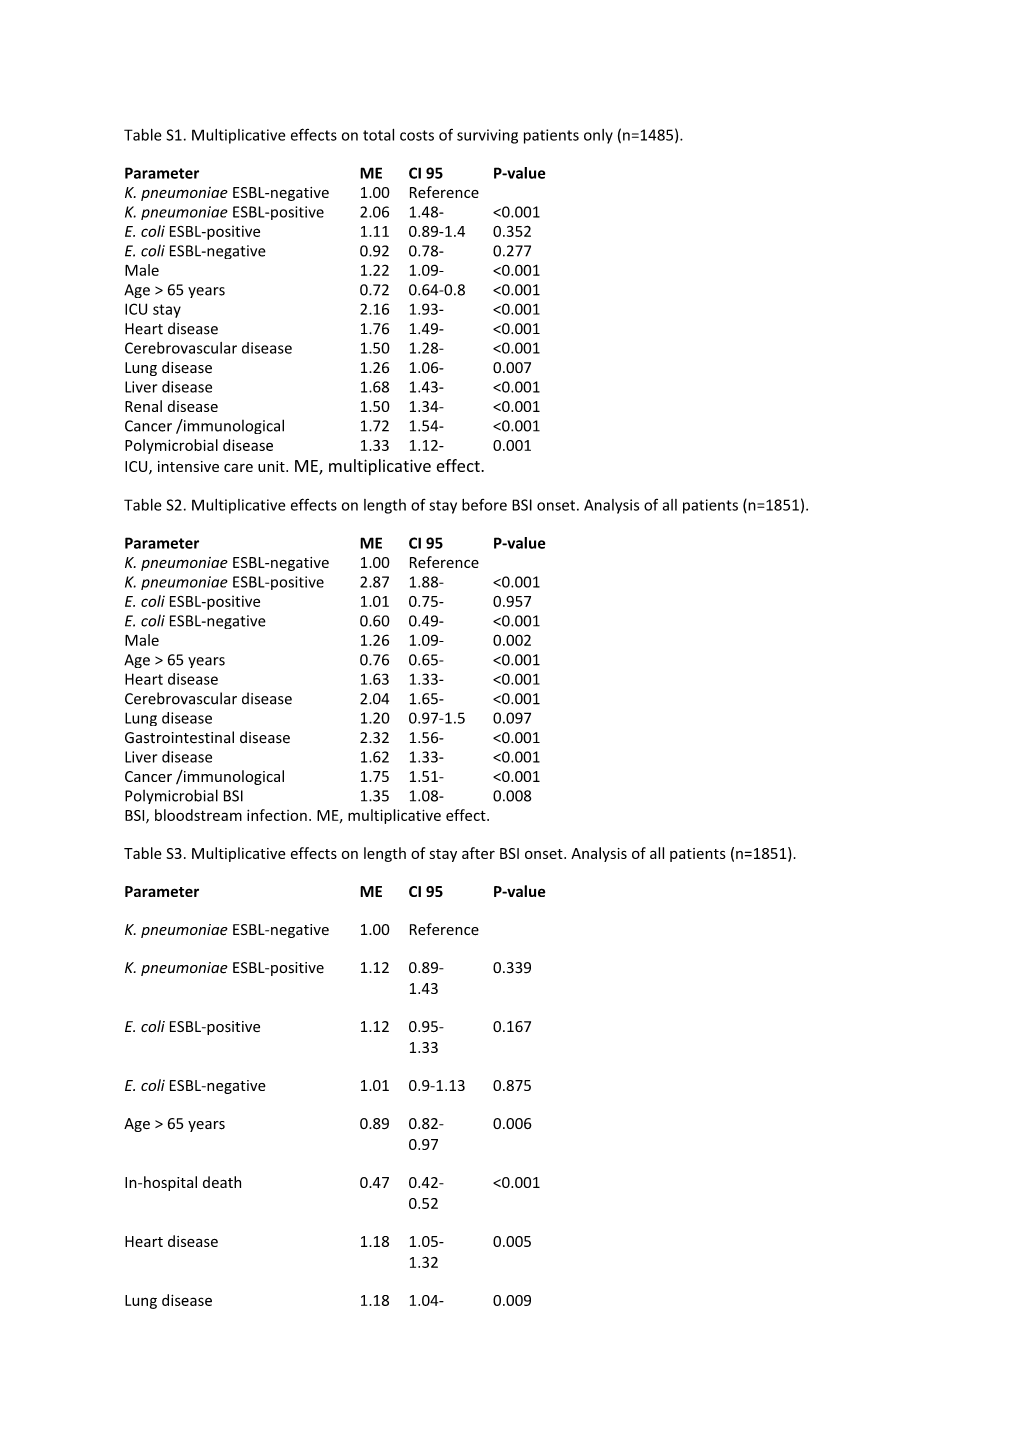 Table S1. Multiplicative Effects on Total Costs of Surviving Patients Only (N=1485)